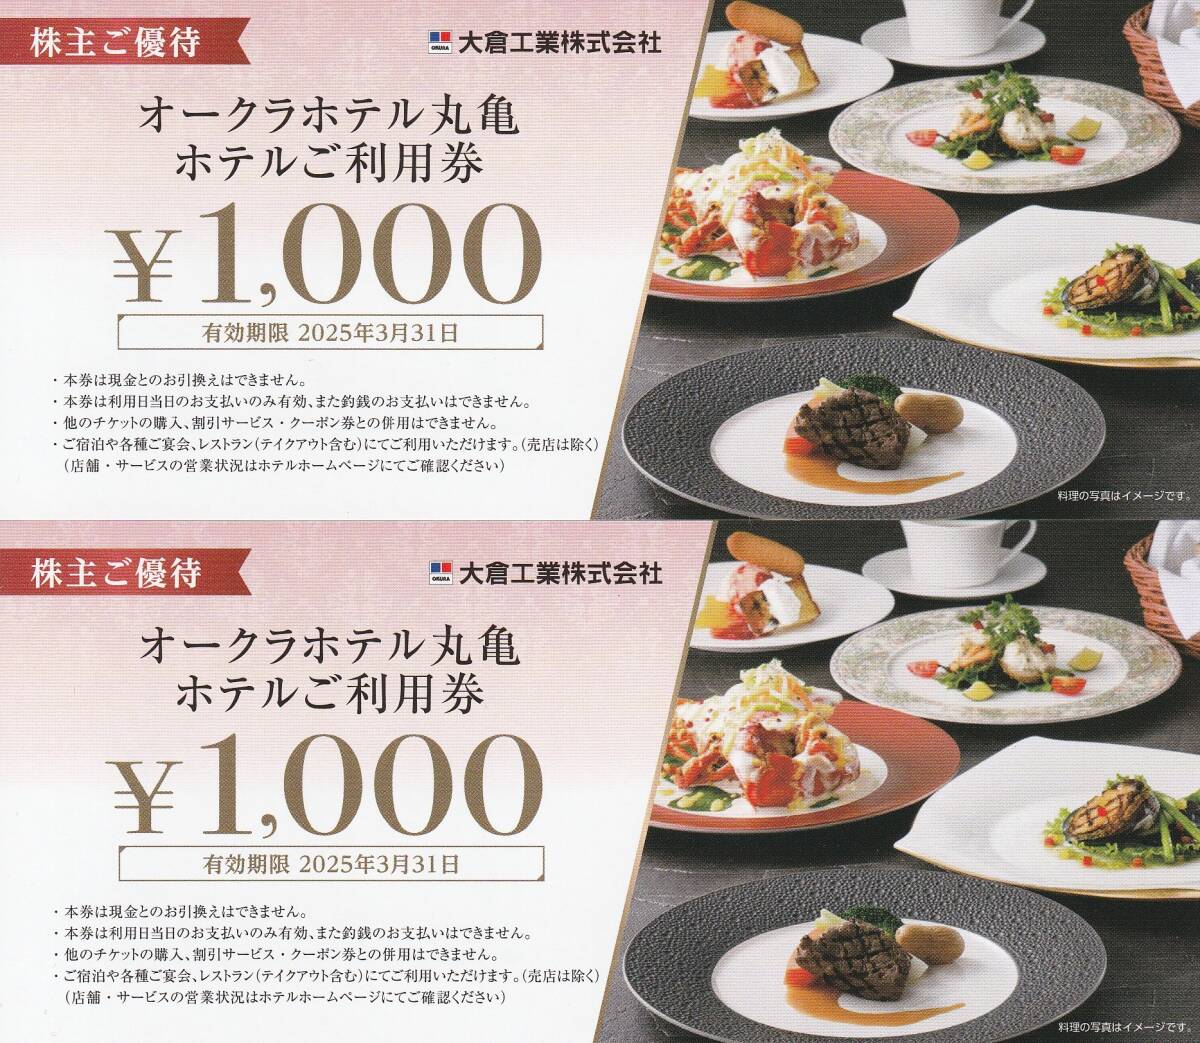  large . industry hospitality okura hotel circle turtle . meal ticket 2,000 jpy minute free shipping 